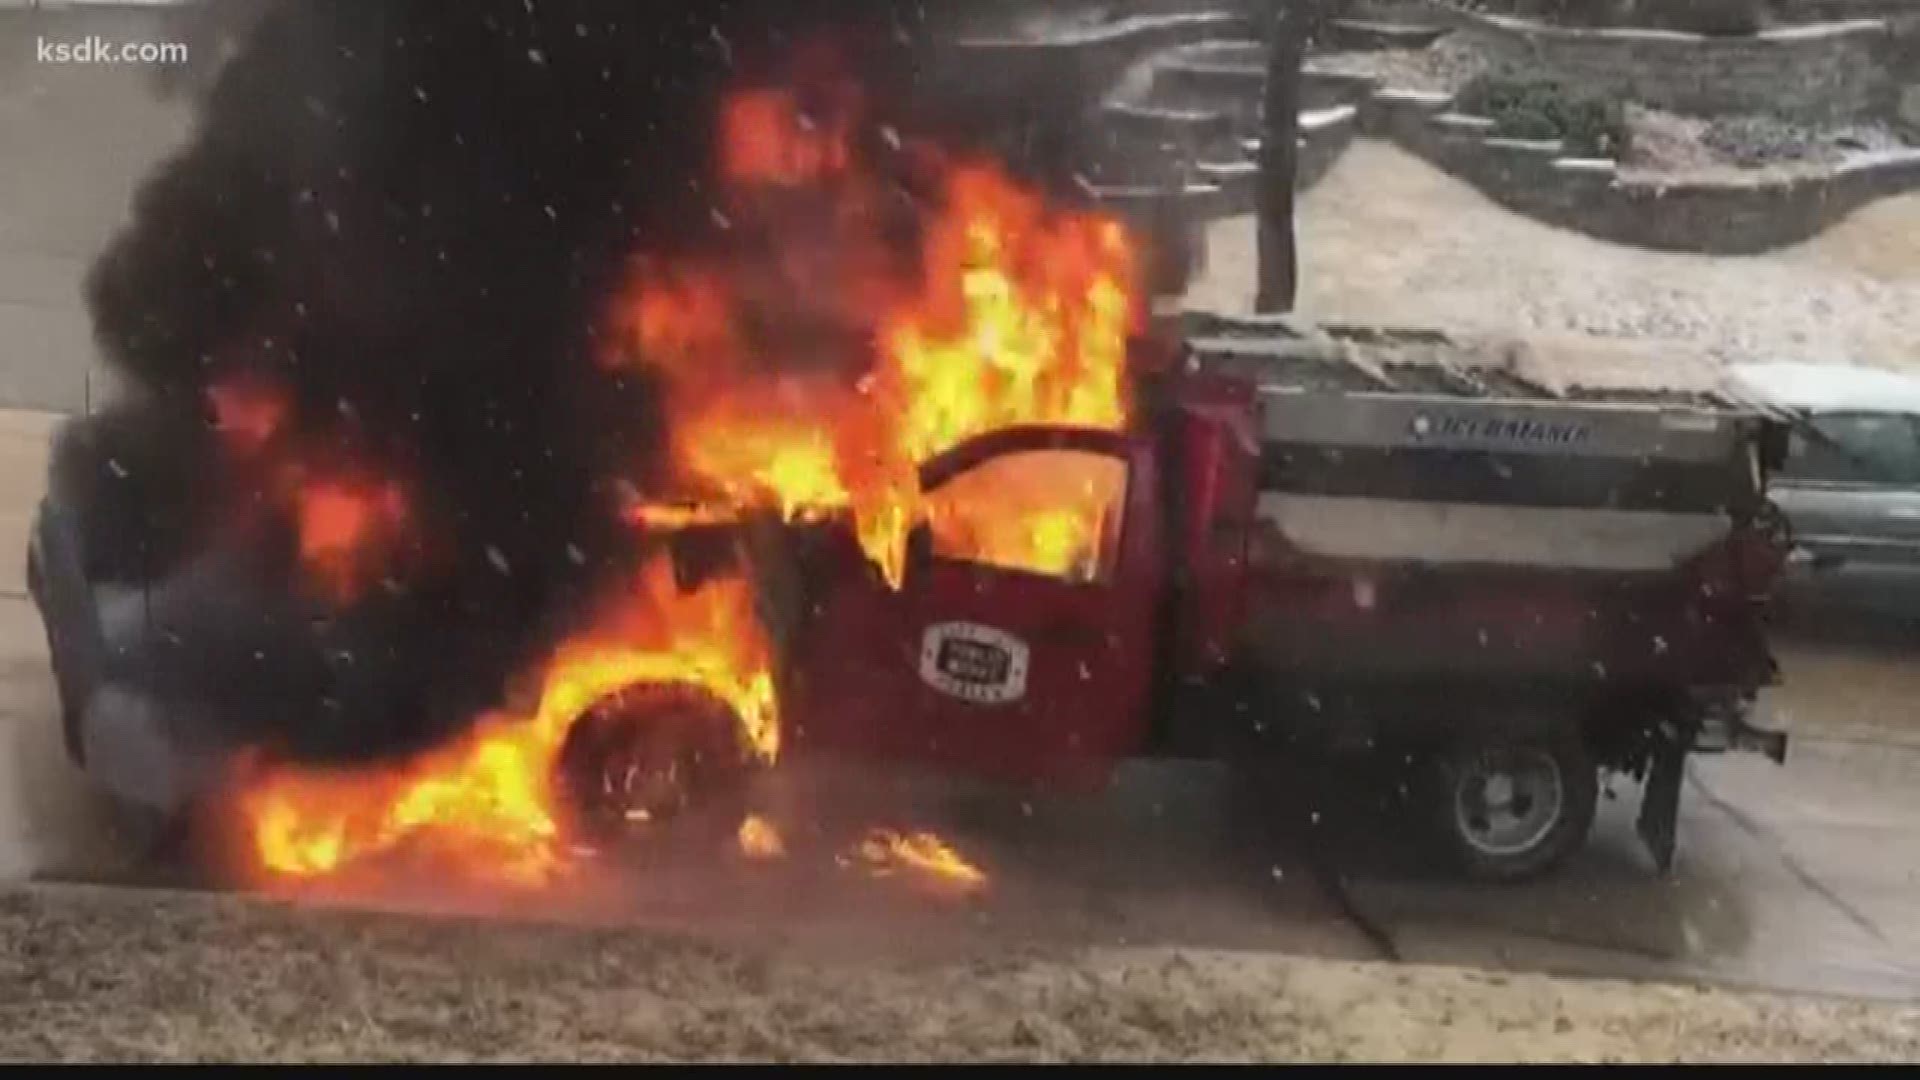 The truck was laying down salt when neighbors reported hearing an explosion.